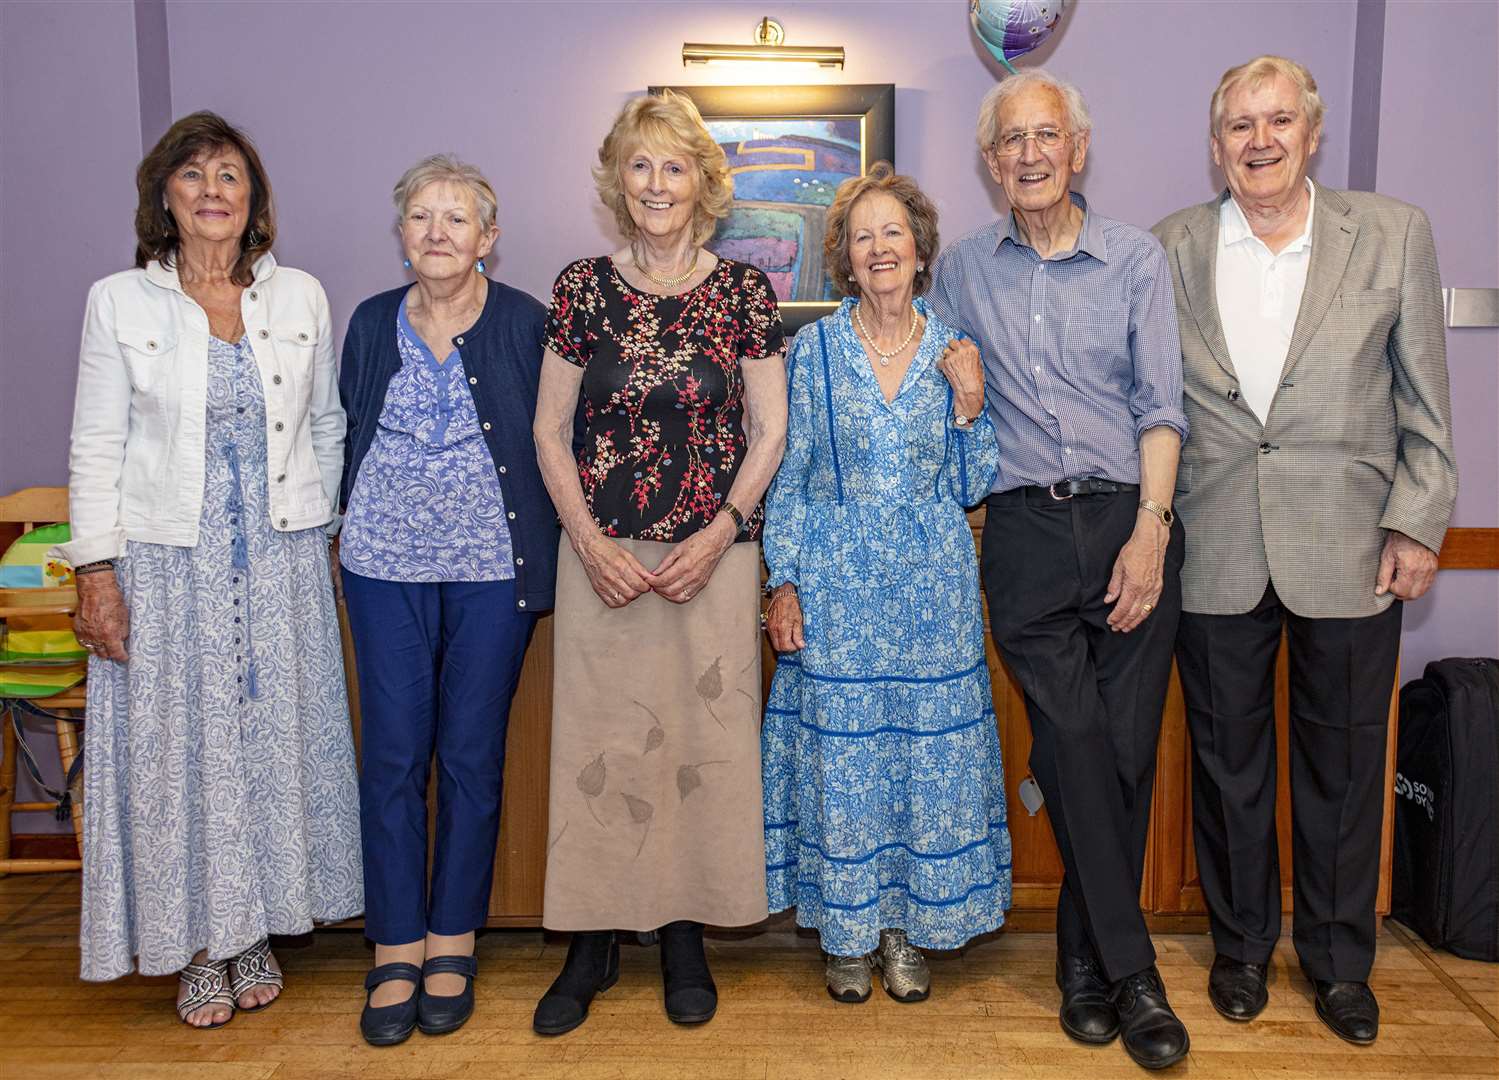 The six schoolmates from 1955. They are from left:Isobell Isobell Beattie, Marigold Ronaldson, Catherine Nicolson, Moira Mackay, Ian Sinclair and David Farquhar